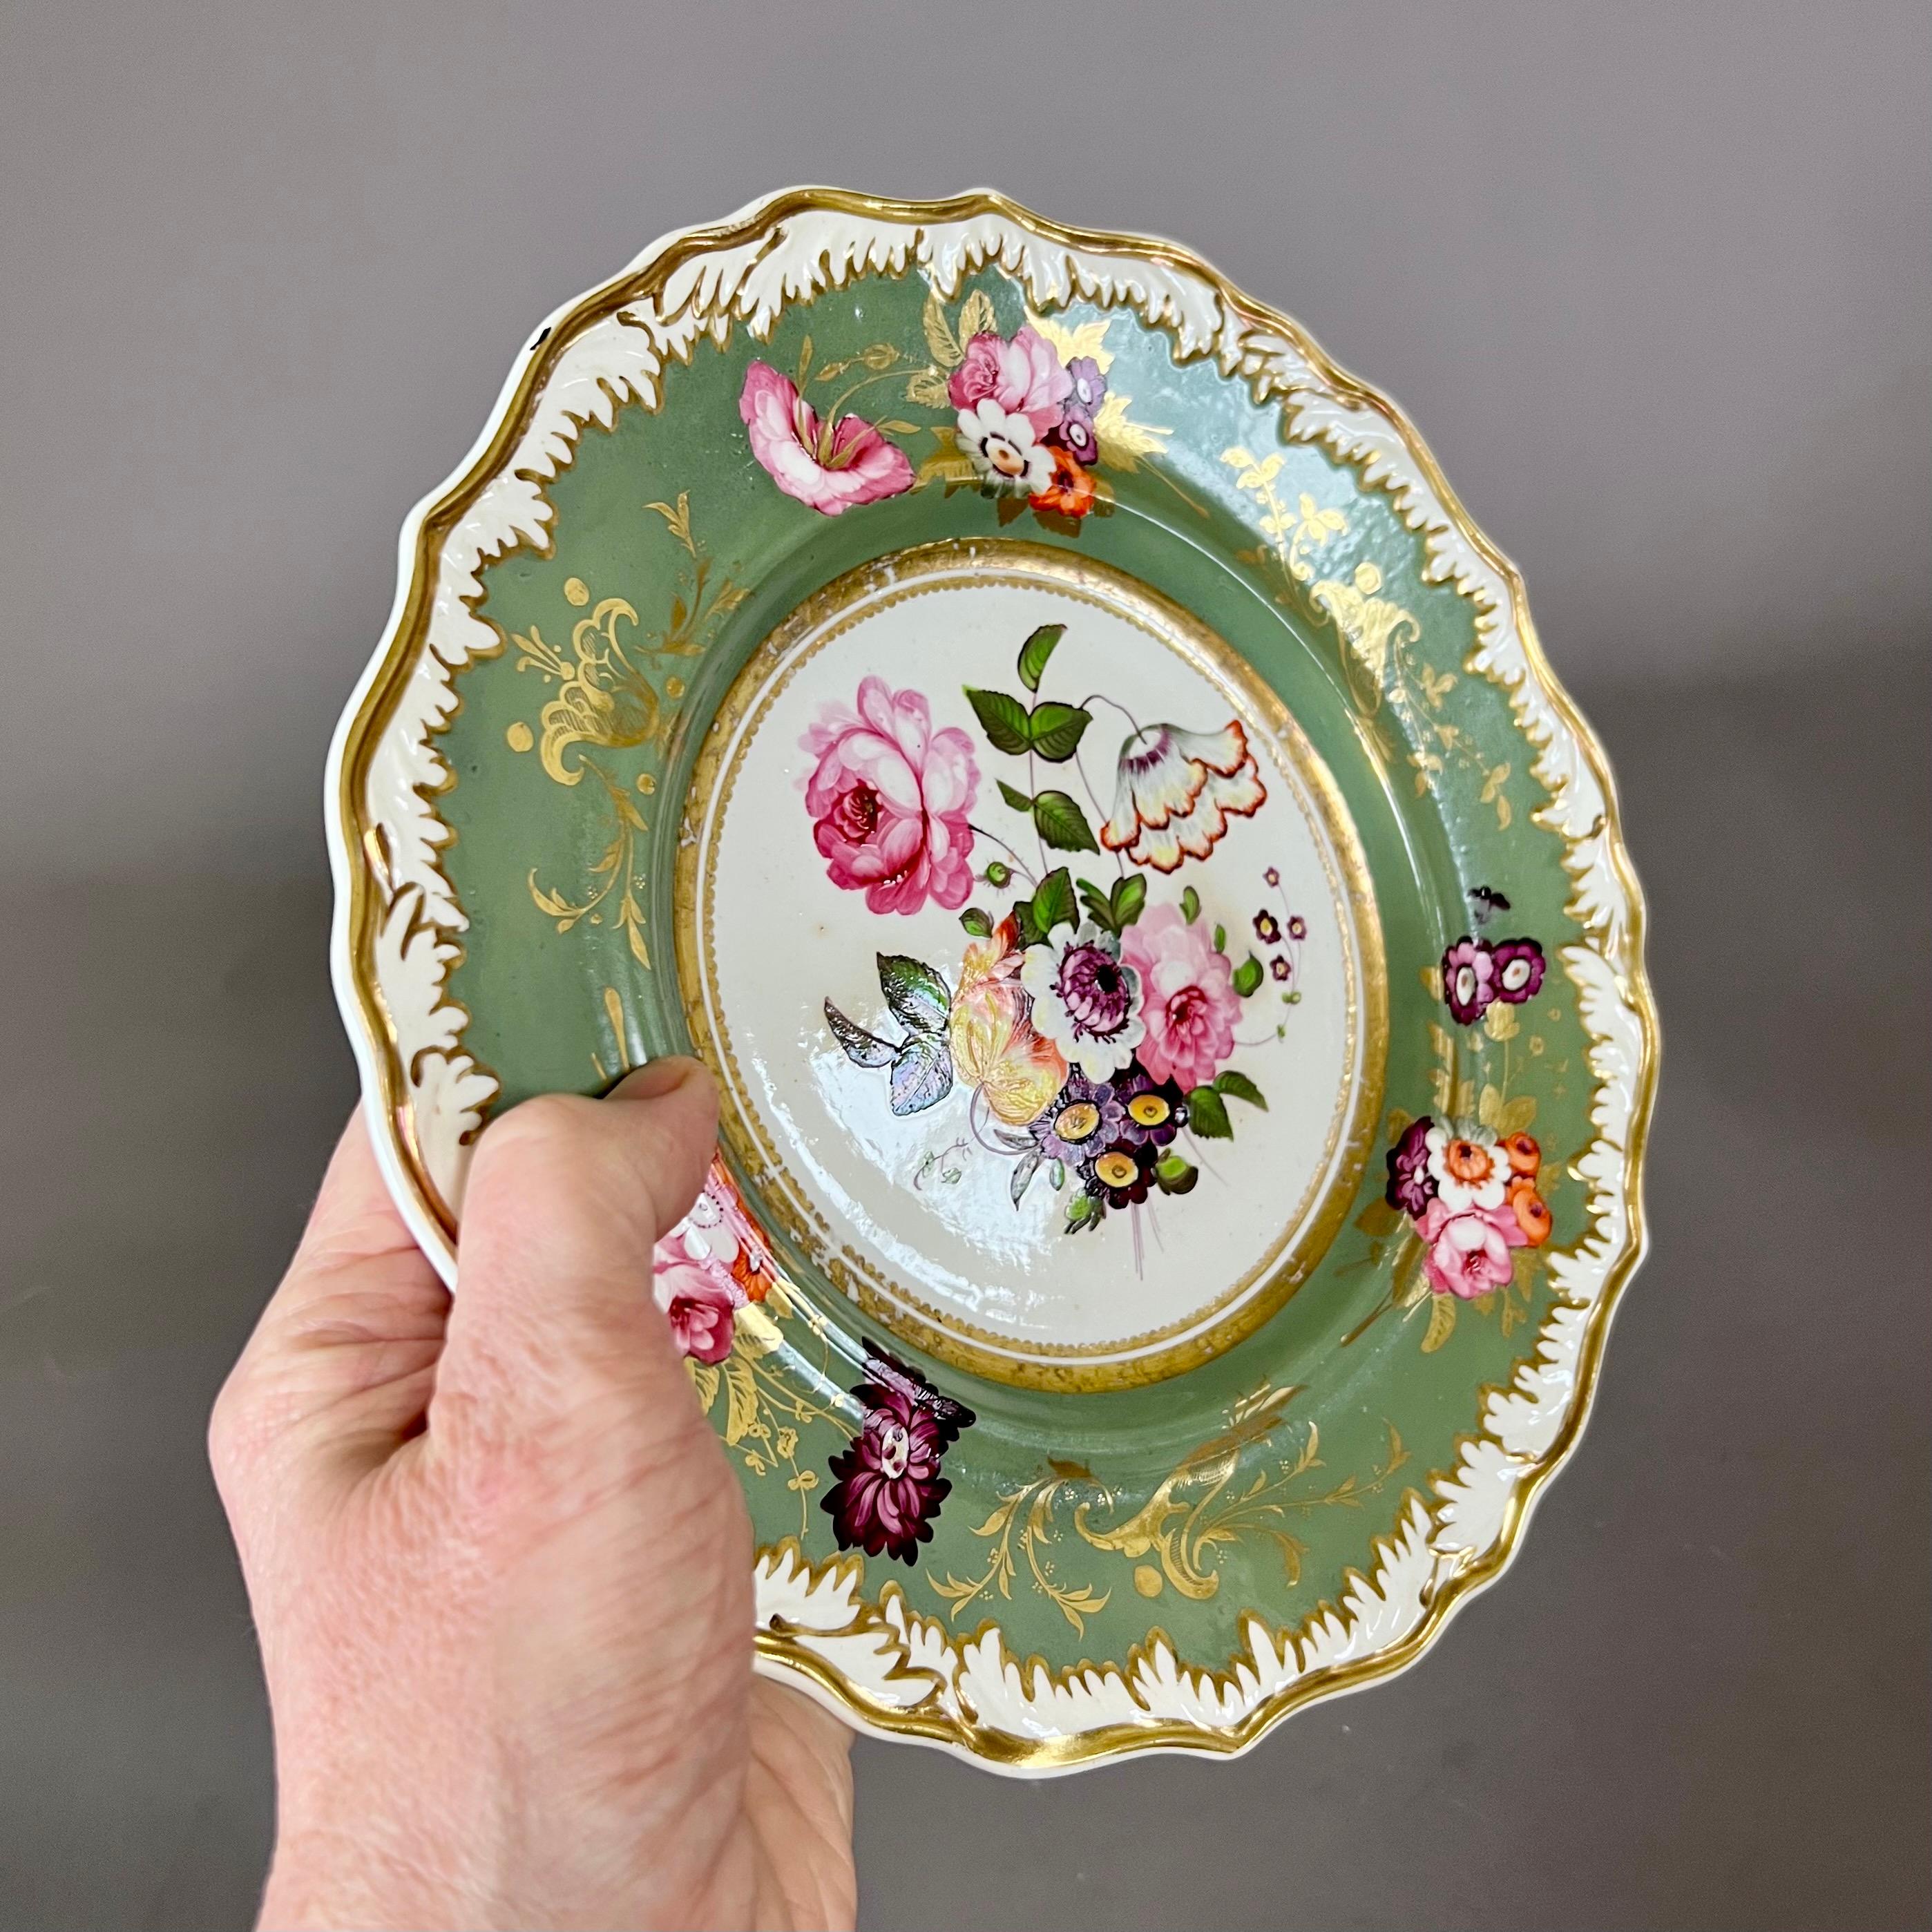 A plate with white melted snow border on a sepia green ground with gilt and full colour flower sprays, and a beautifully painted flower bouquet in the centre

Provenance: Geoffrey A. Godden collection

Pattern 843
Year: ca 1822
Size: 23cm  diameter